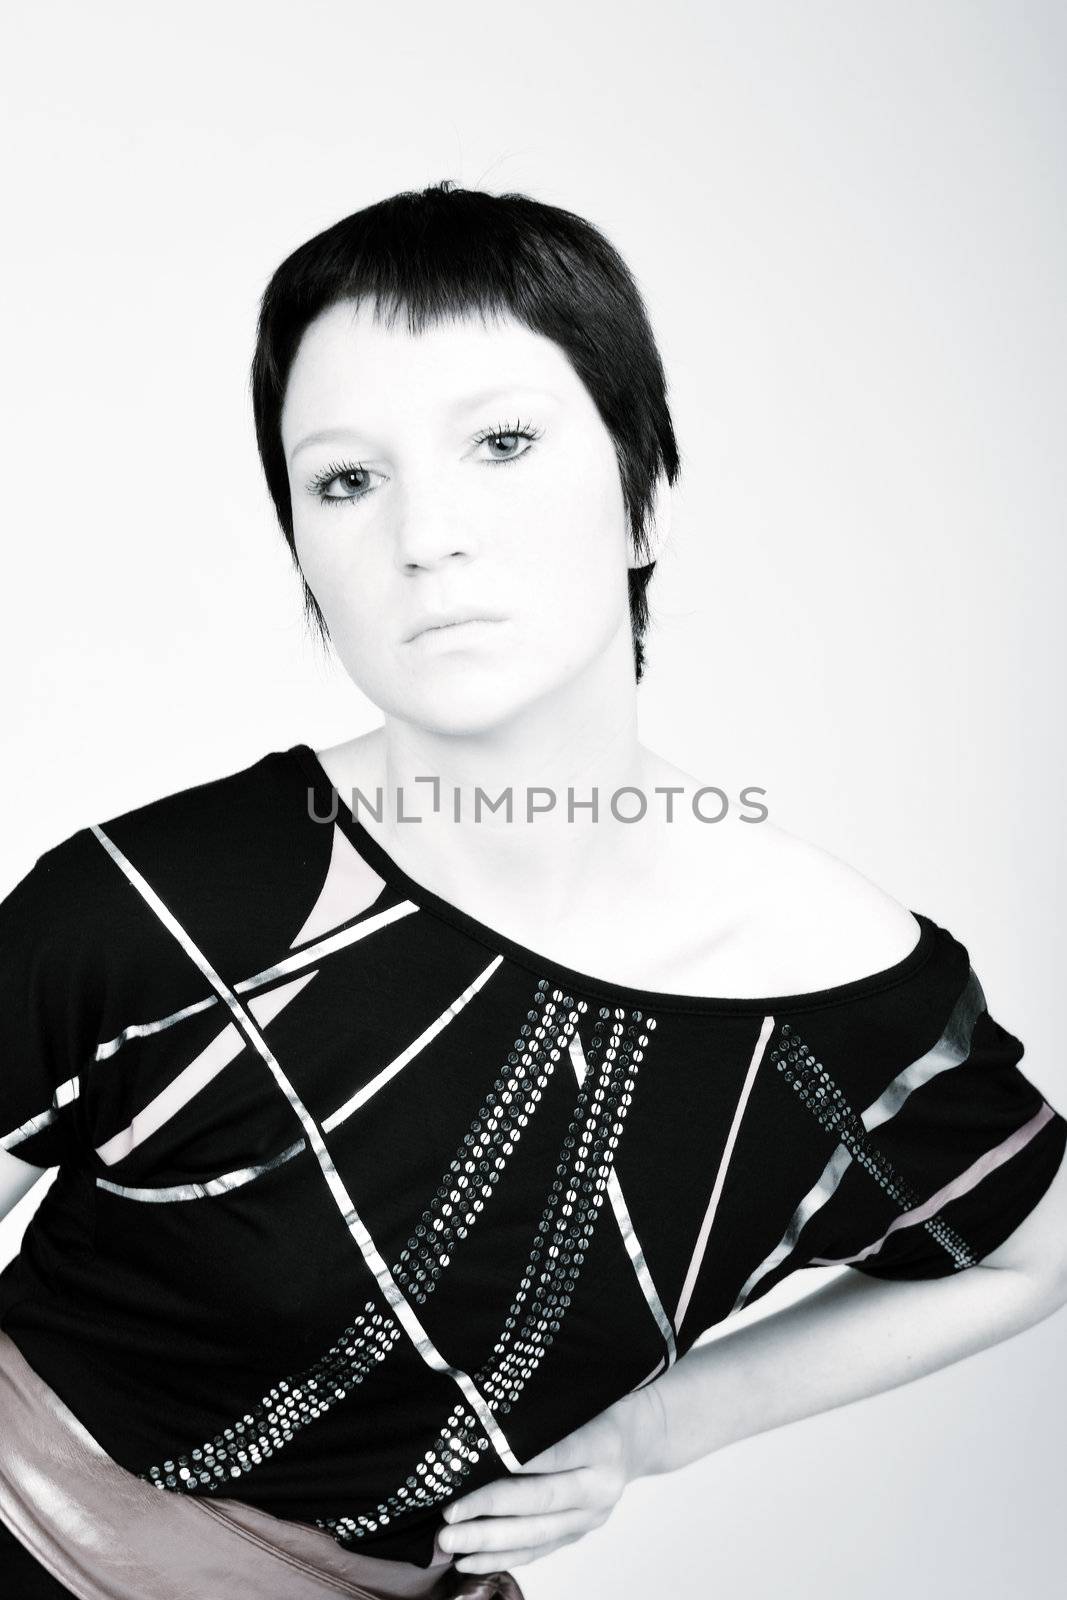 Studio portrait of a young woman with short hair in a fashion pose